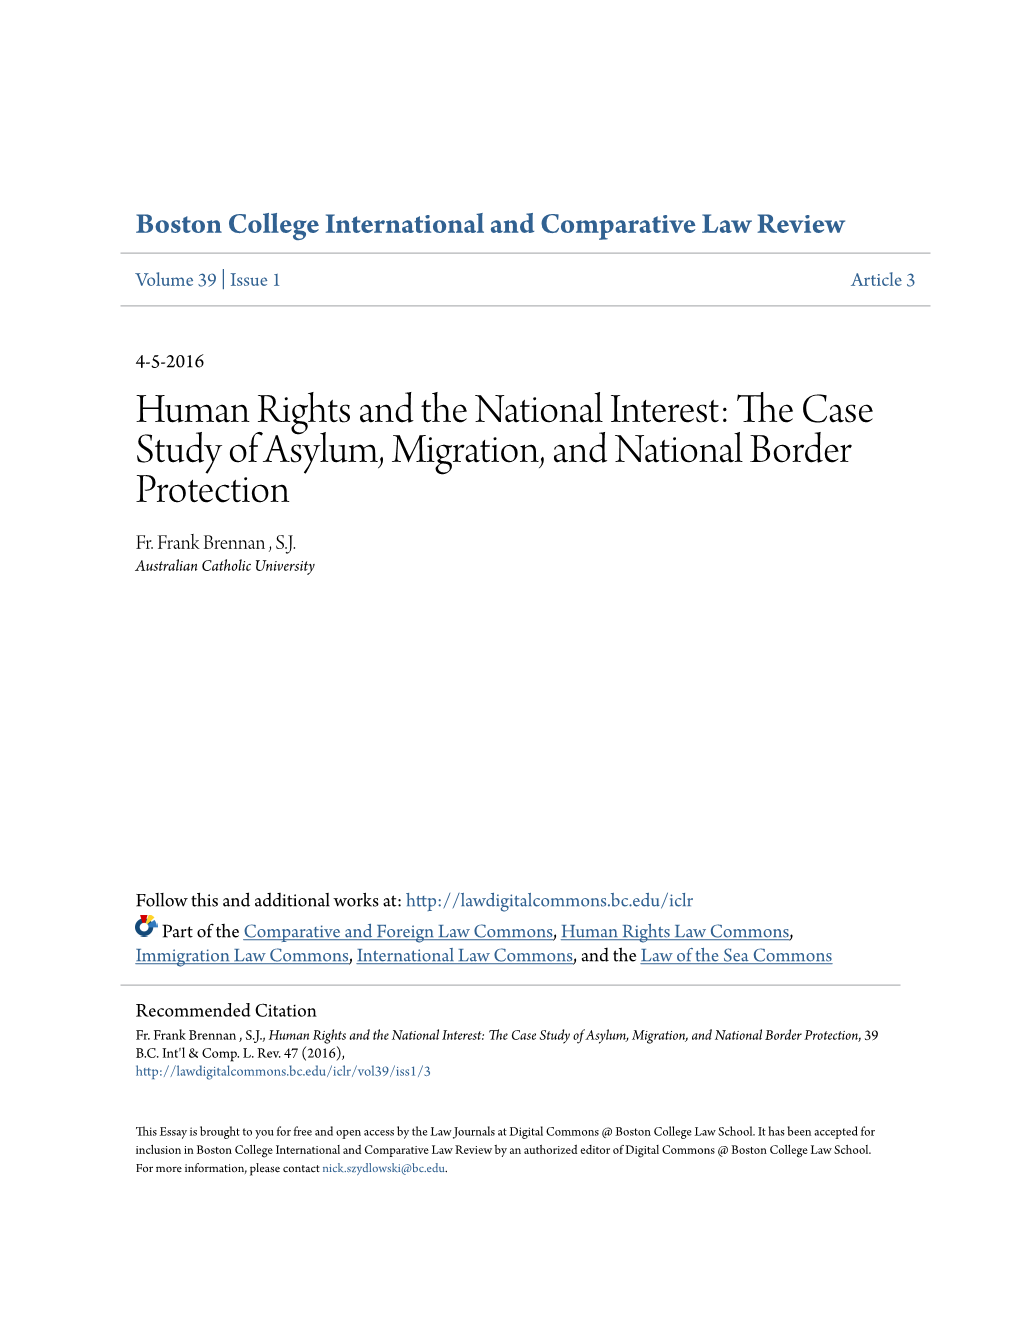 Human Rights and the National Interest: the Ac Se Study of Asylum, Migration, and National Border Protection Fr